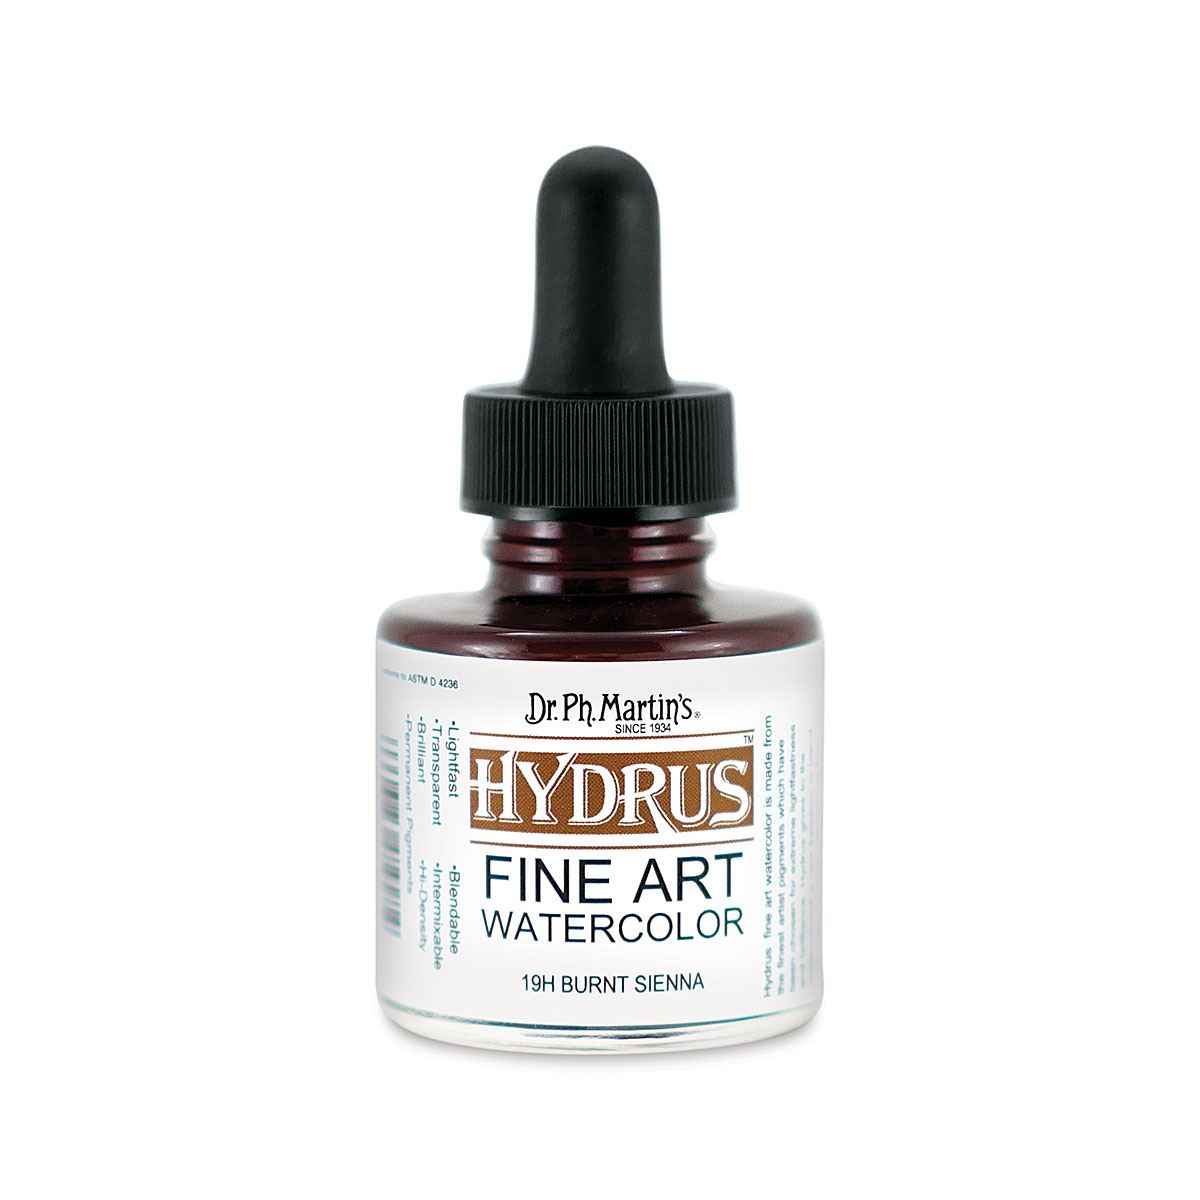 Dr. Ph. Martin's HYDRUS Watercolor - Meininger Art Supply